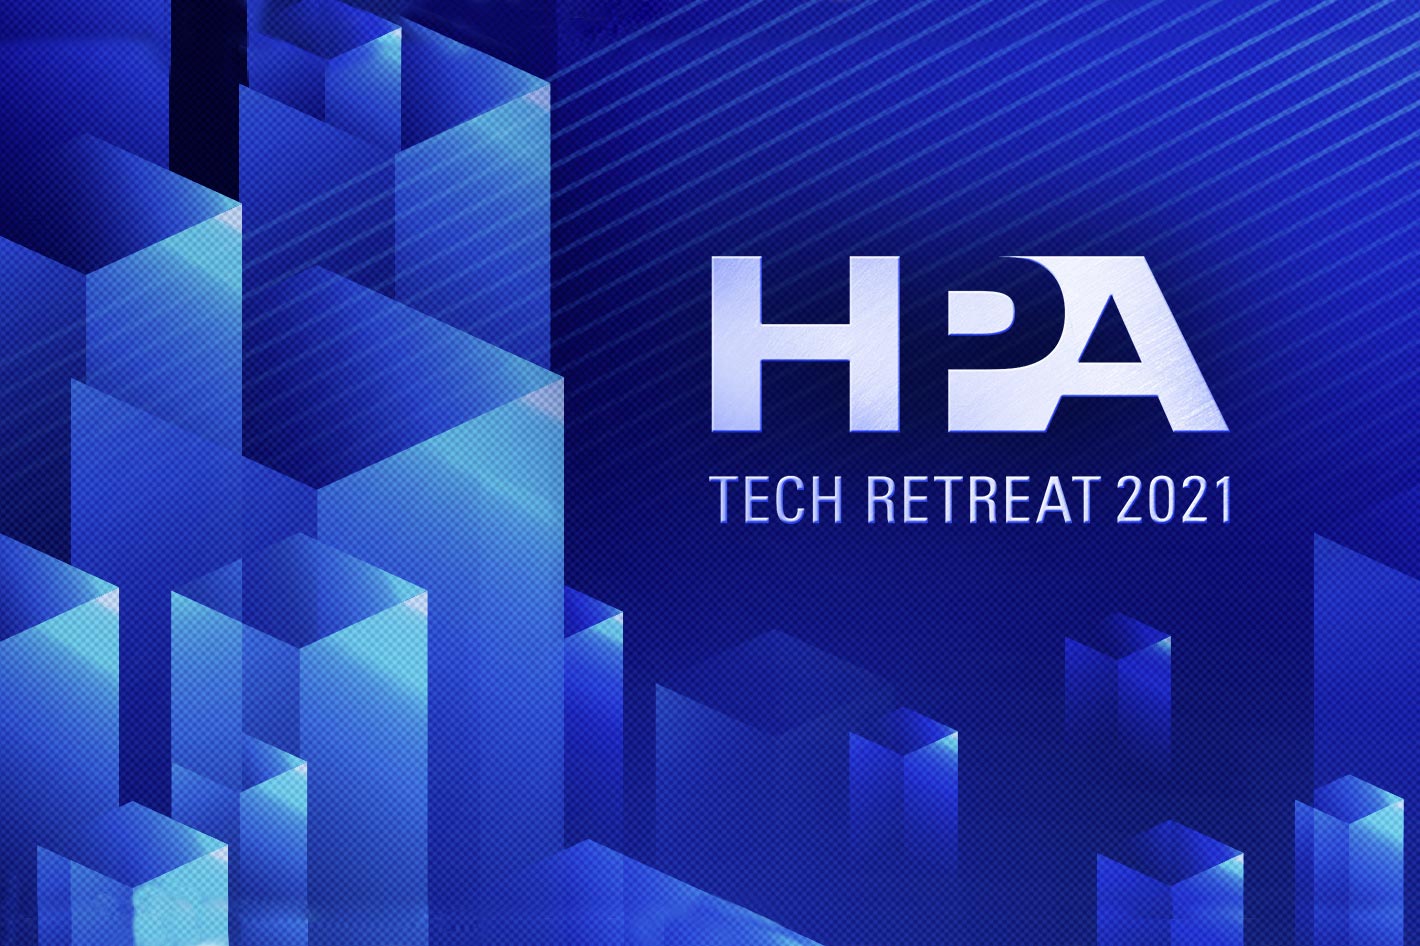 MovieLabs Partners with HPA Tech Retreat to Provide Strategic Insight for 2021 Show